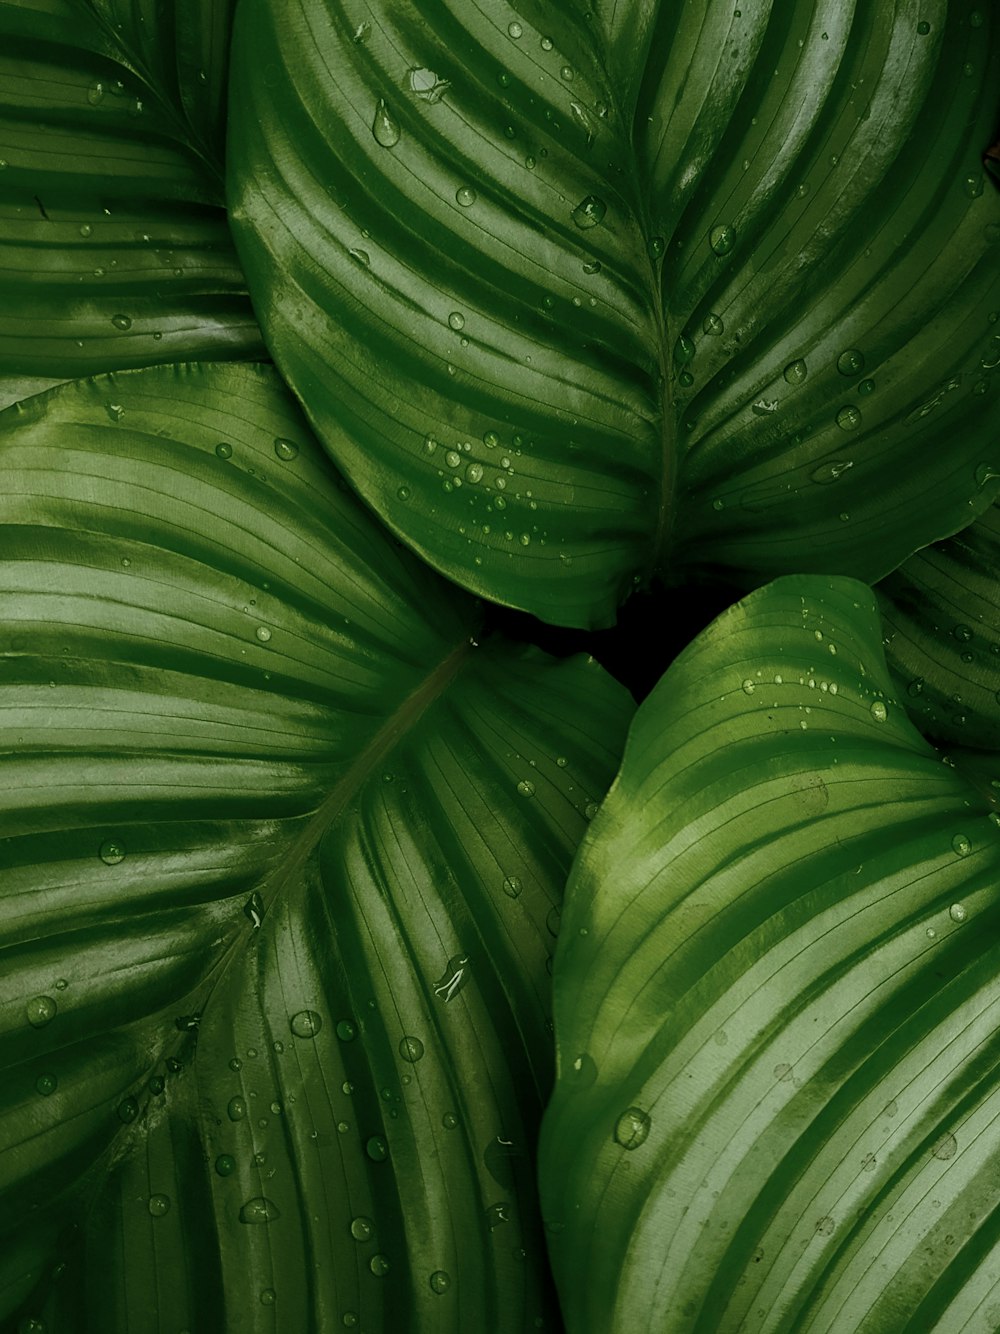 Green Leafs Pictures  Download Free Images on Unsplash